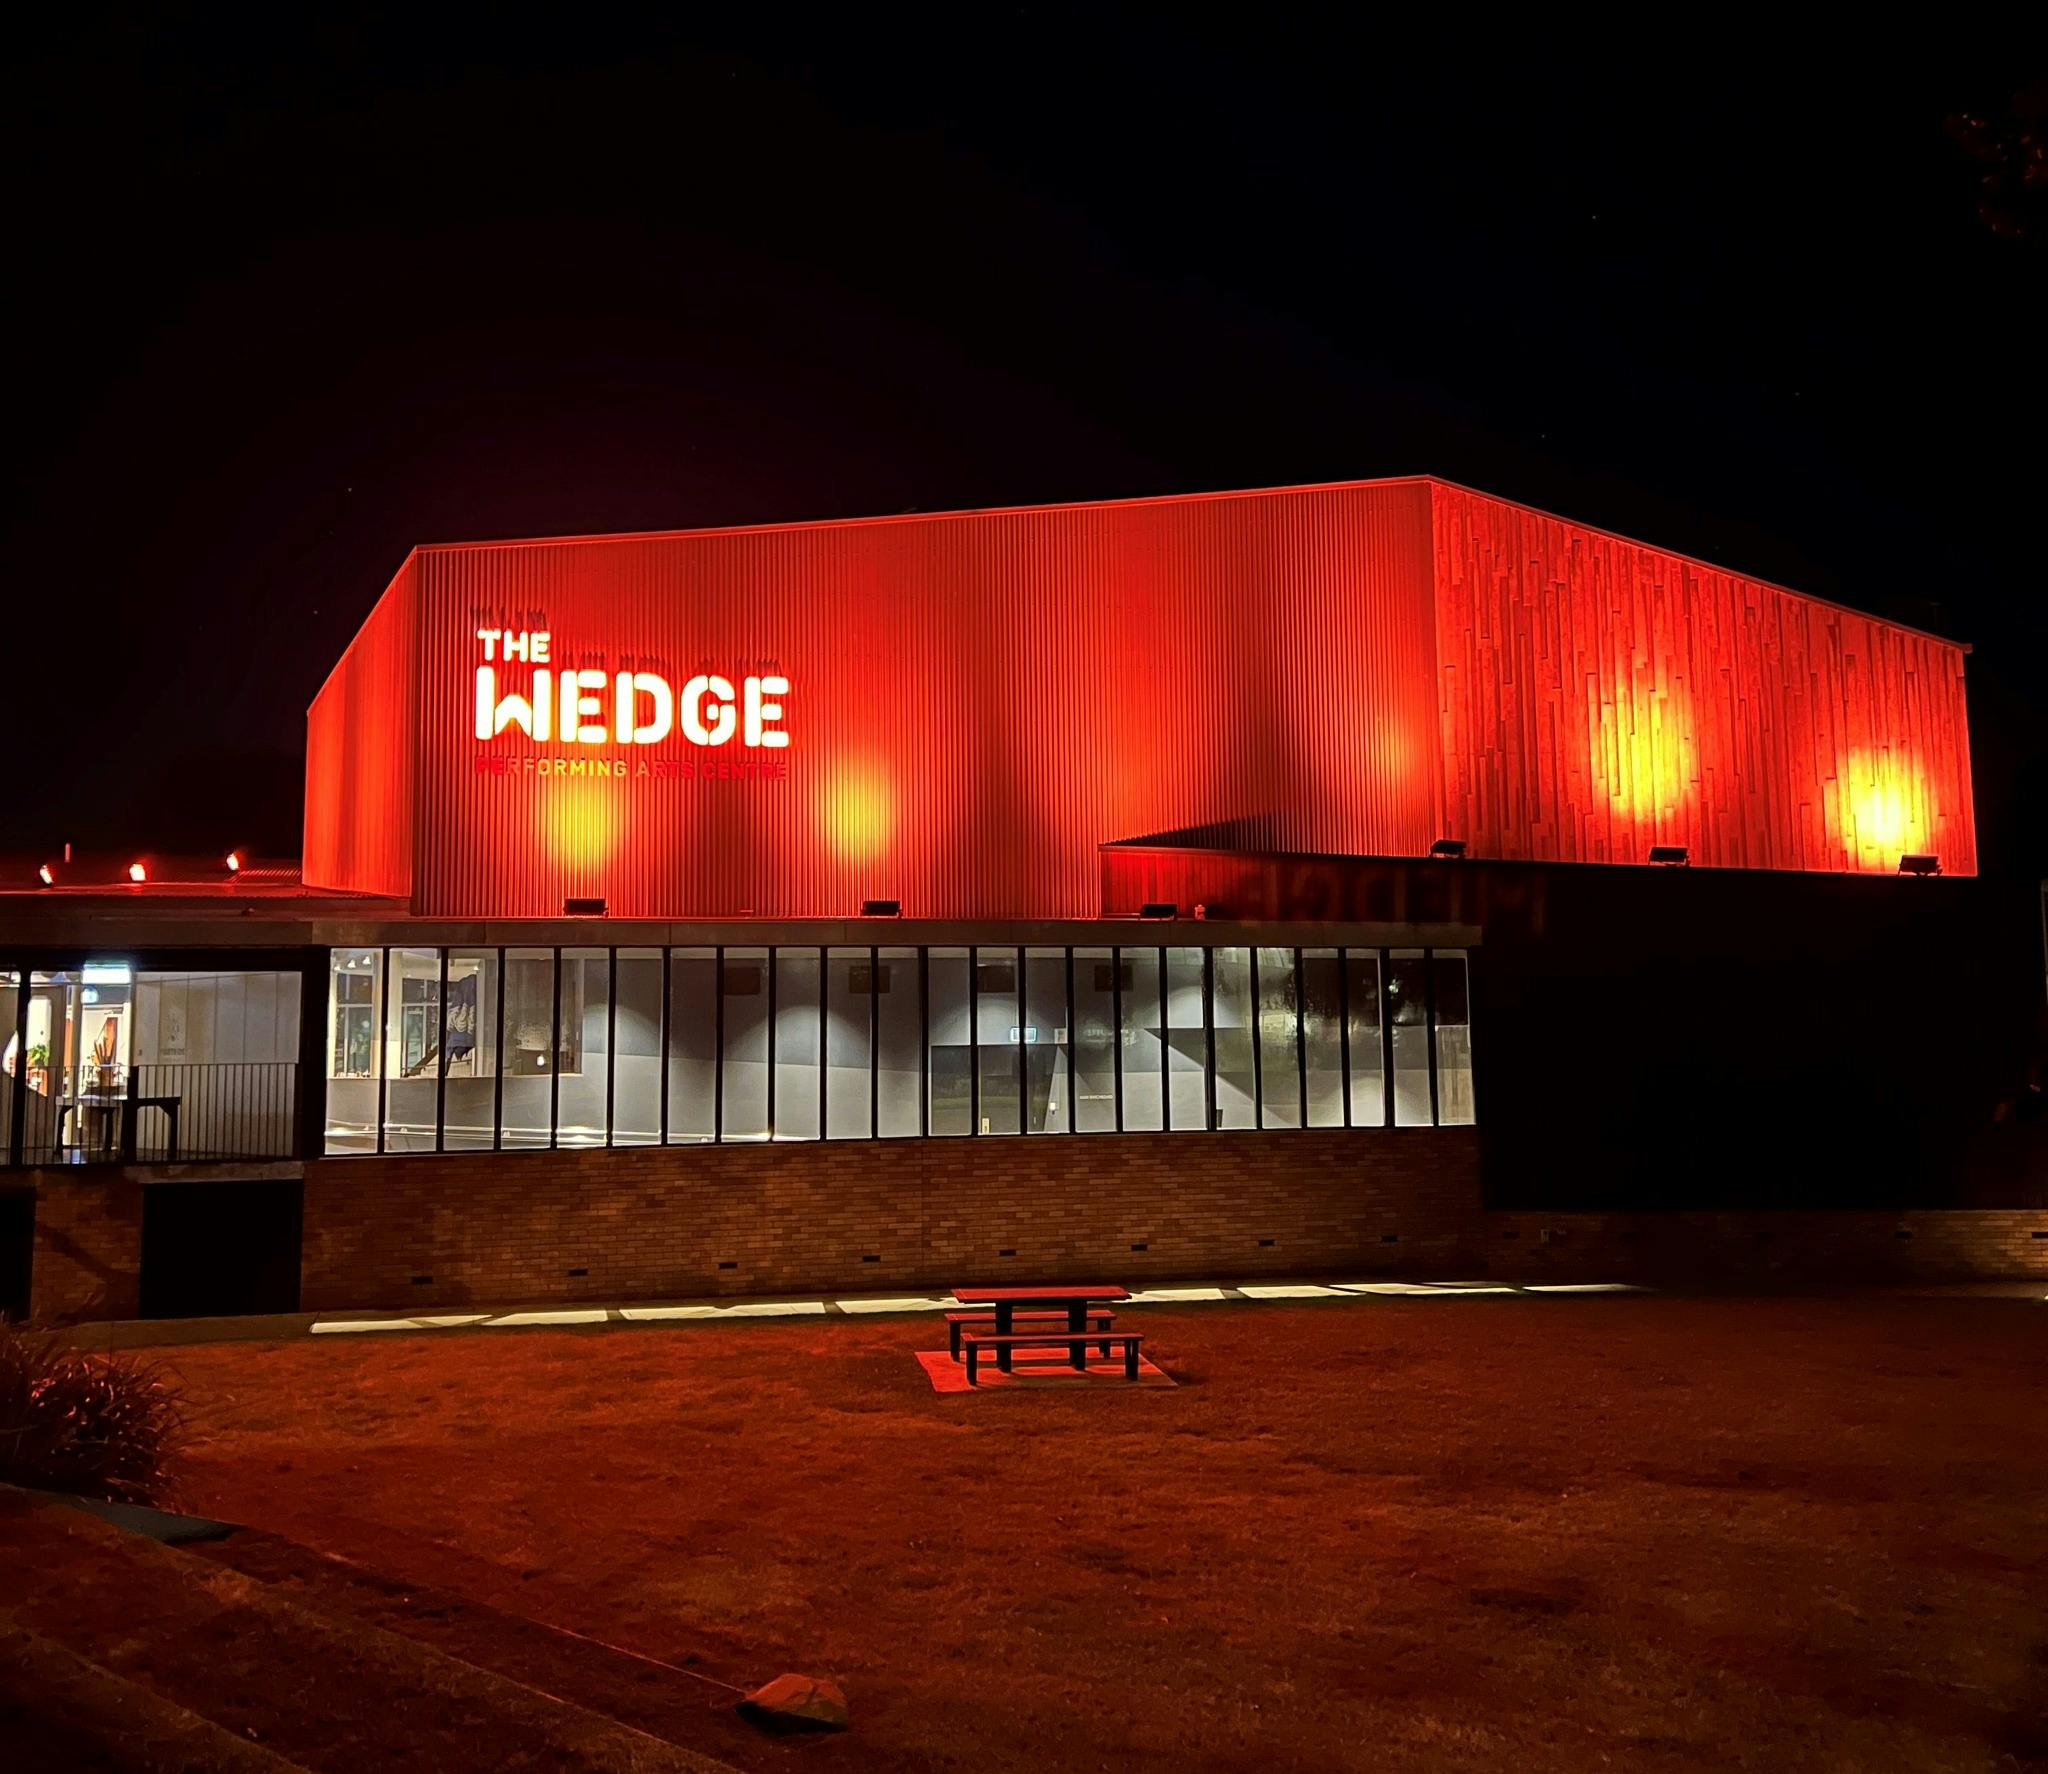 The Wedge Performing Arts Centre